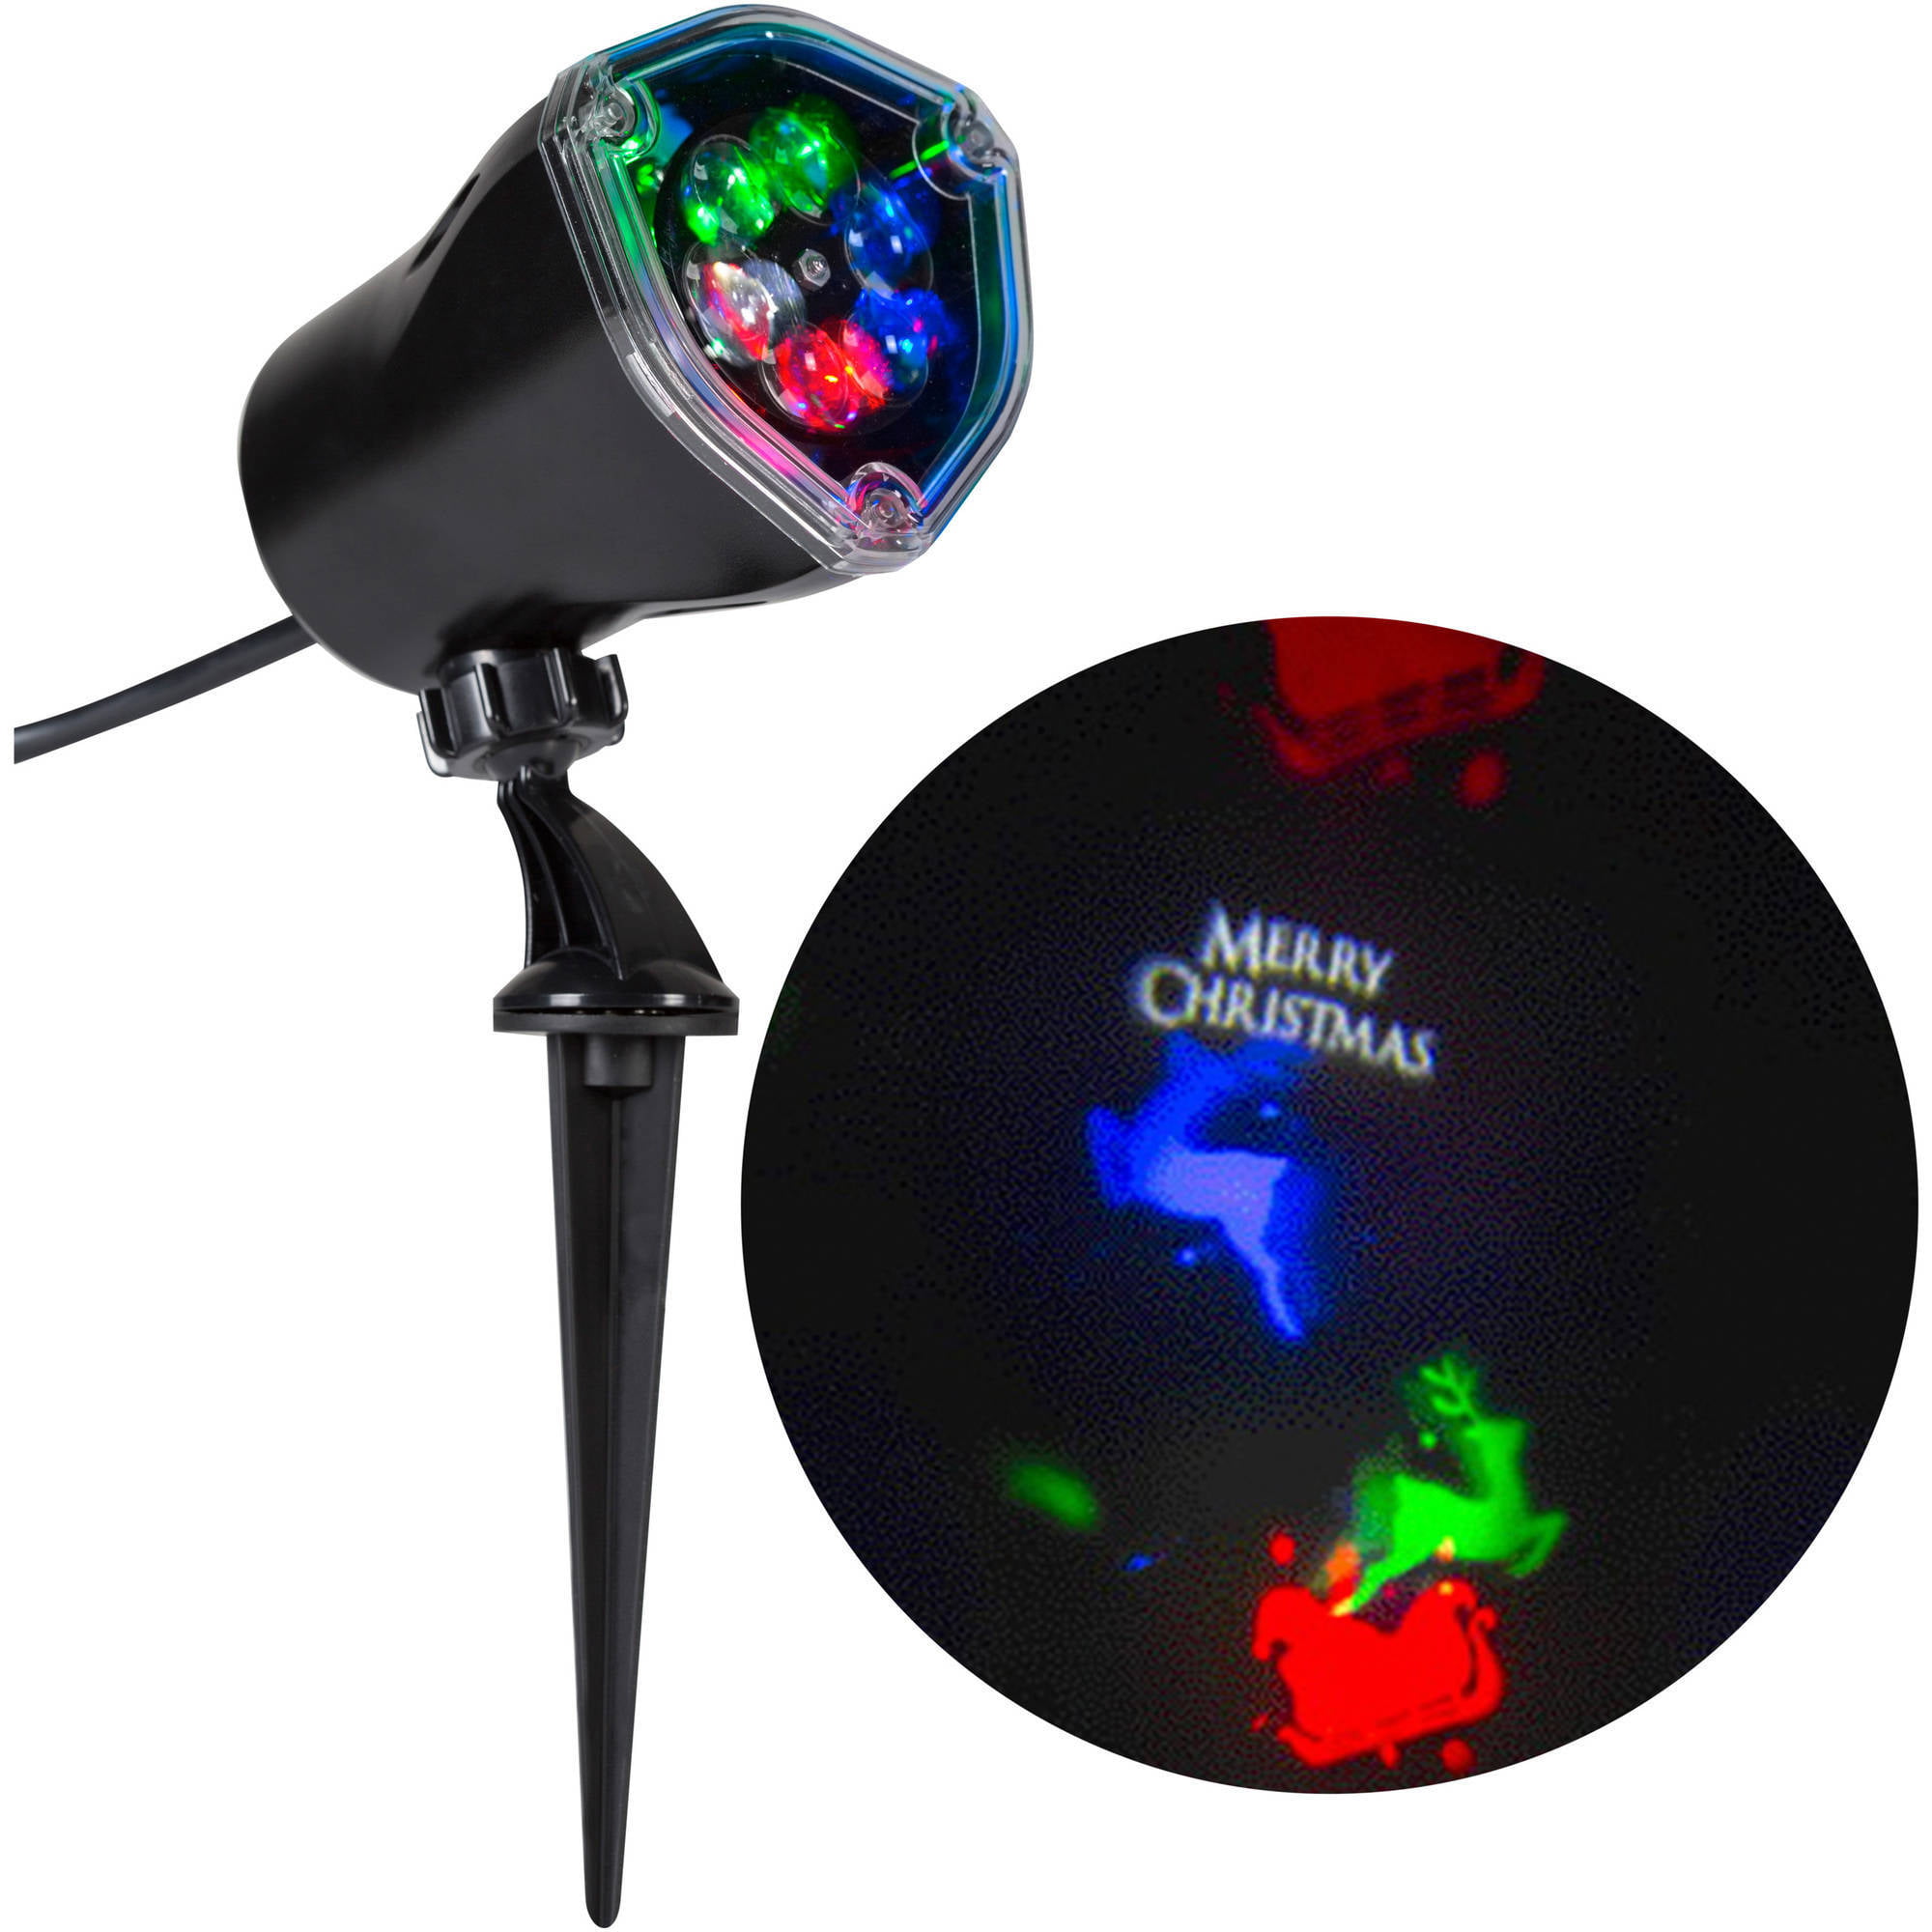 GEMMY Christmas MULTI-COLOR Kaleidoscope LED Light Show Projector New 